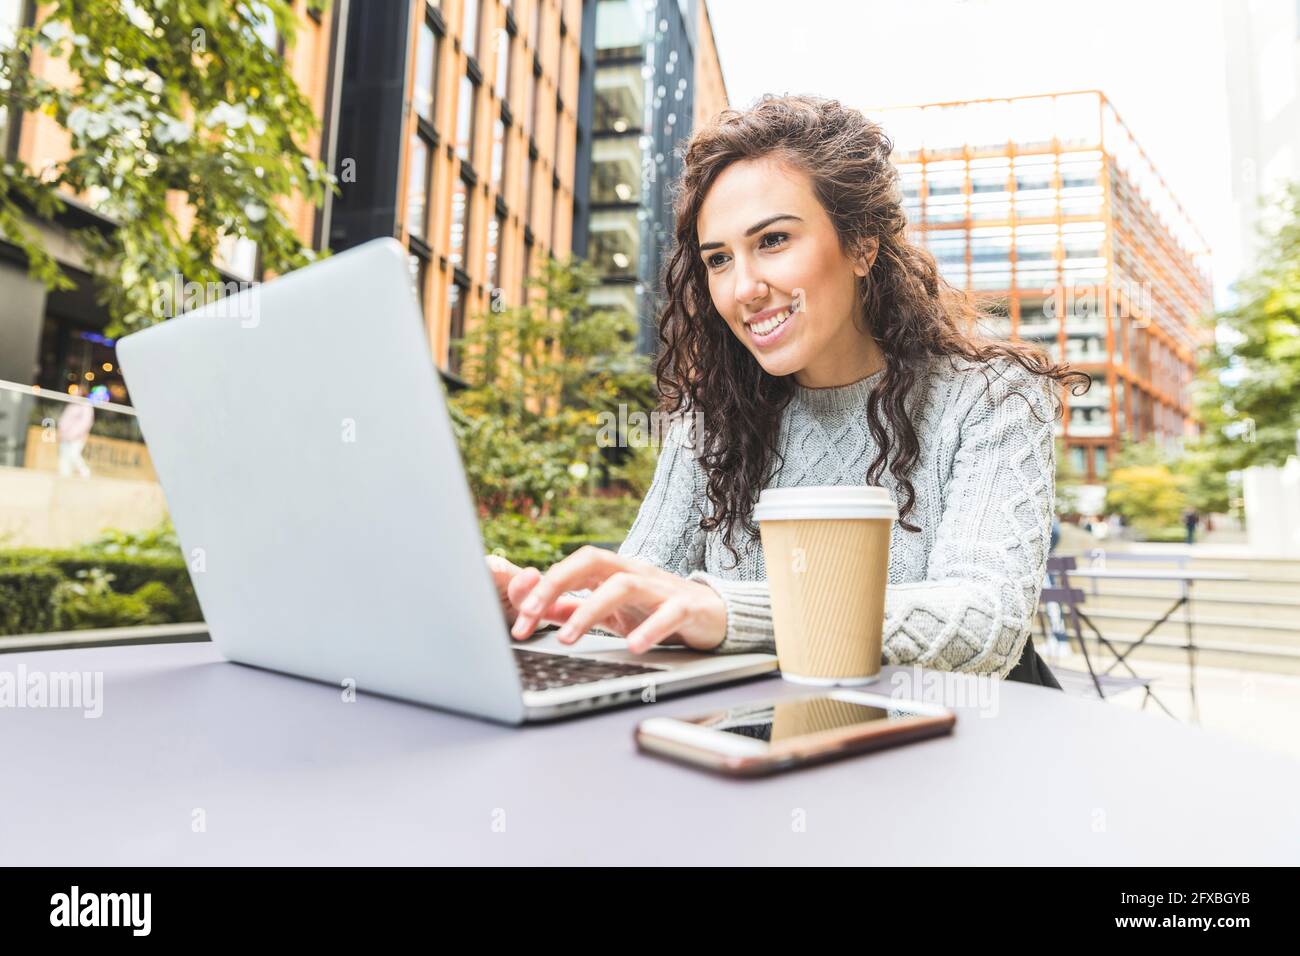 Smiling businesswoman using laptop at cafe in city Stock Photo